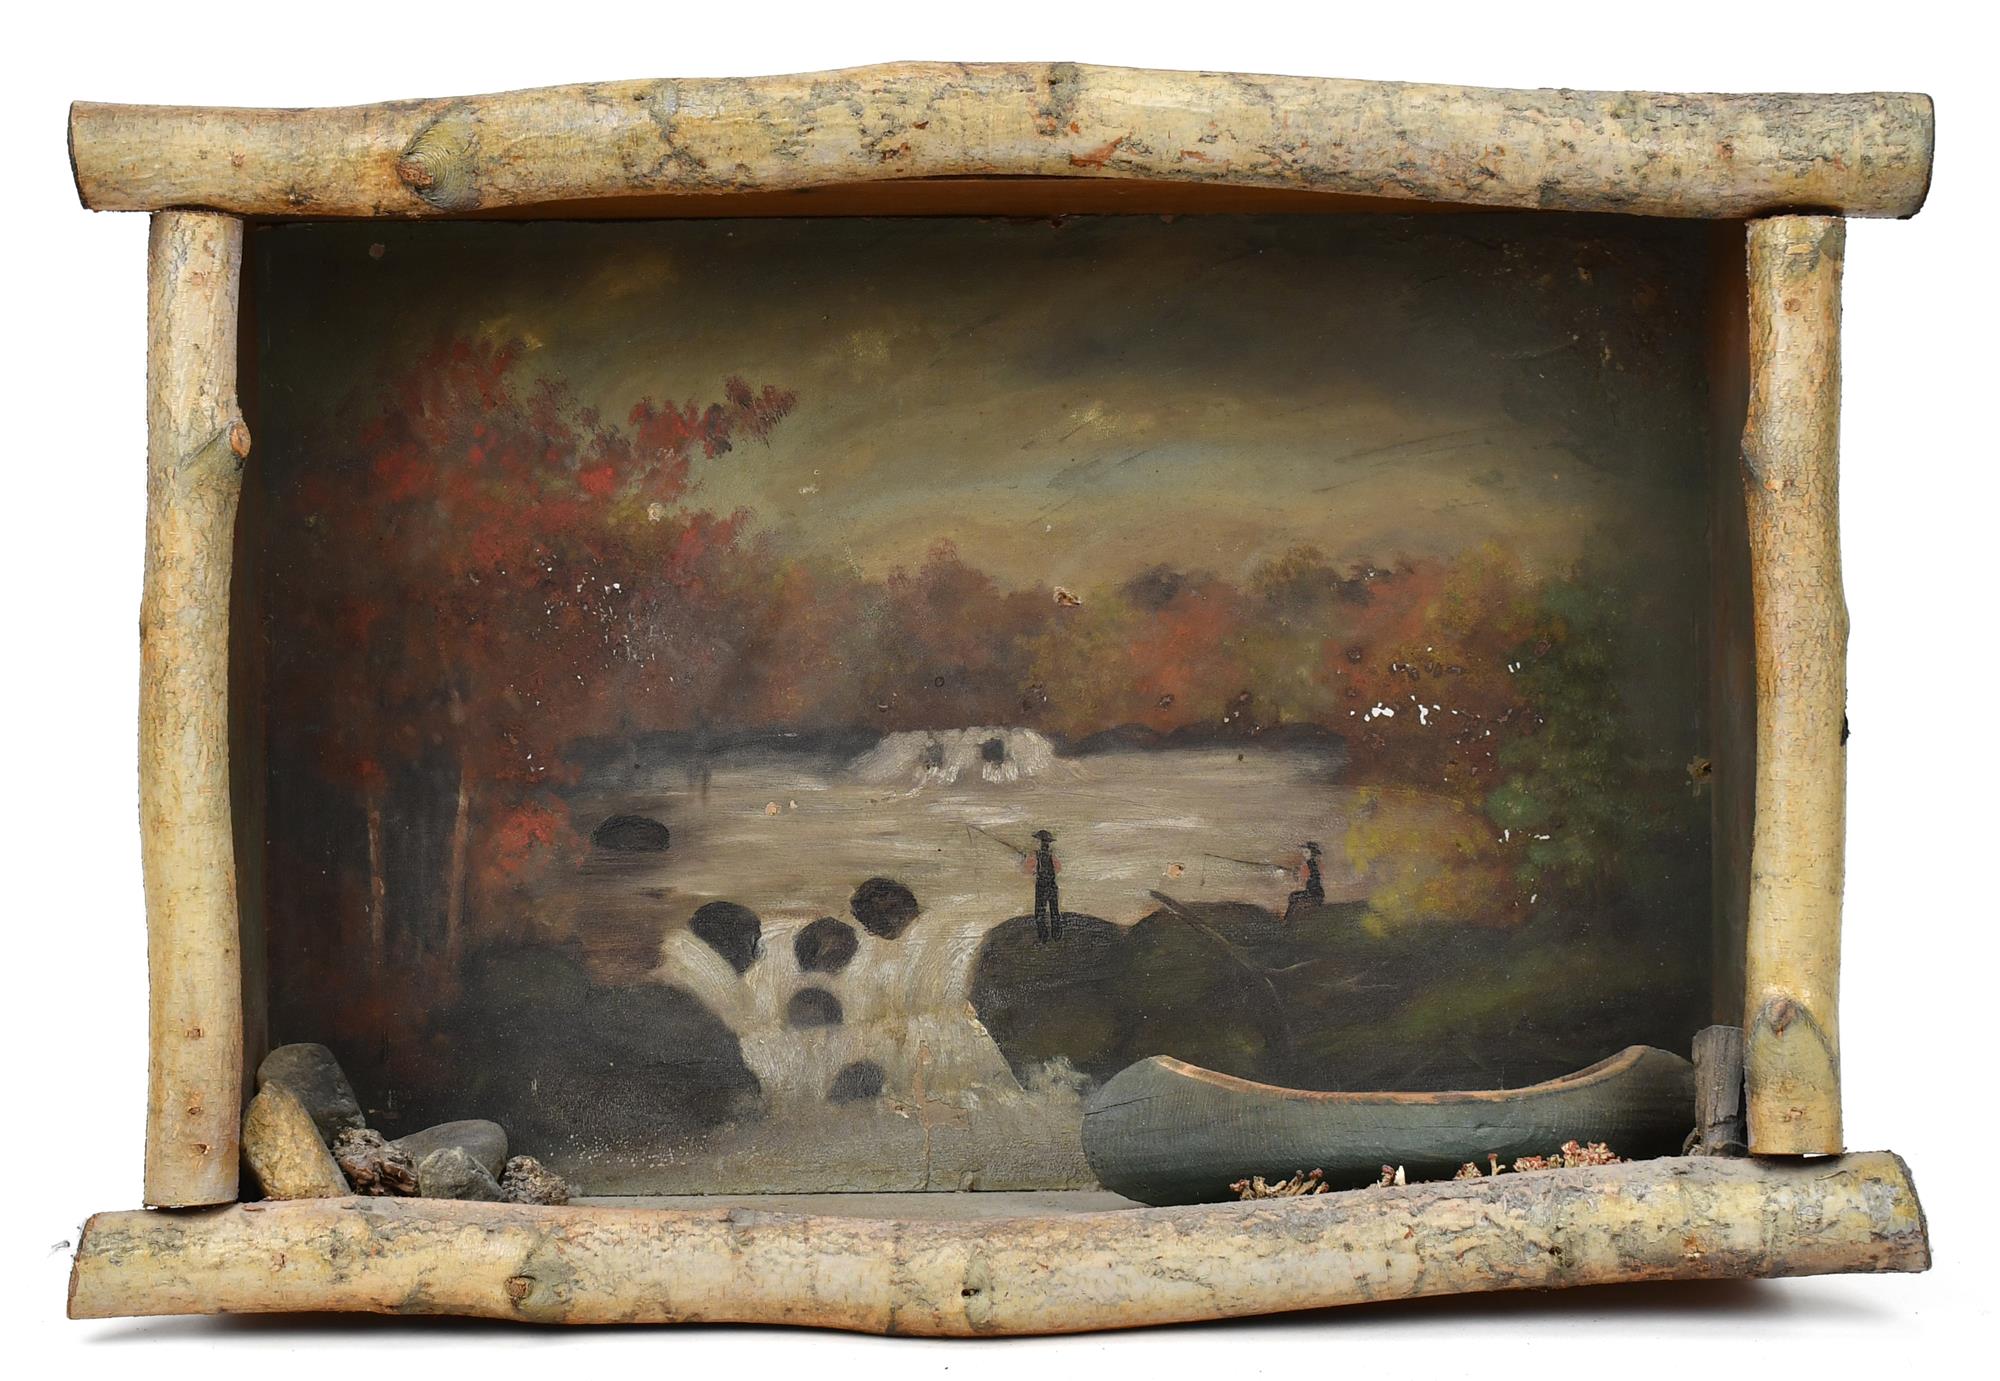 ANTIQUE SCENIC SHADOWBOX. A northern